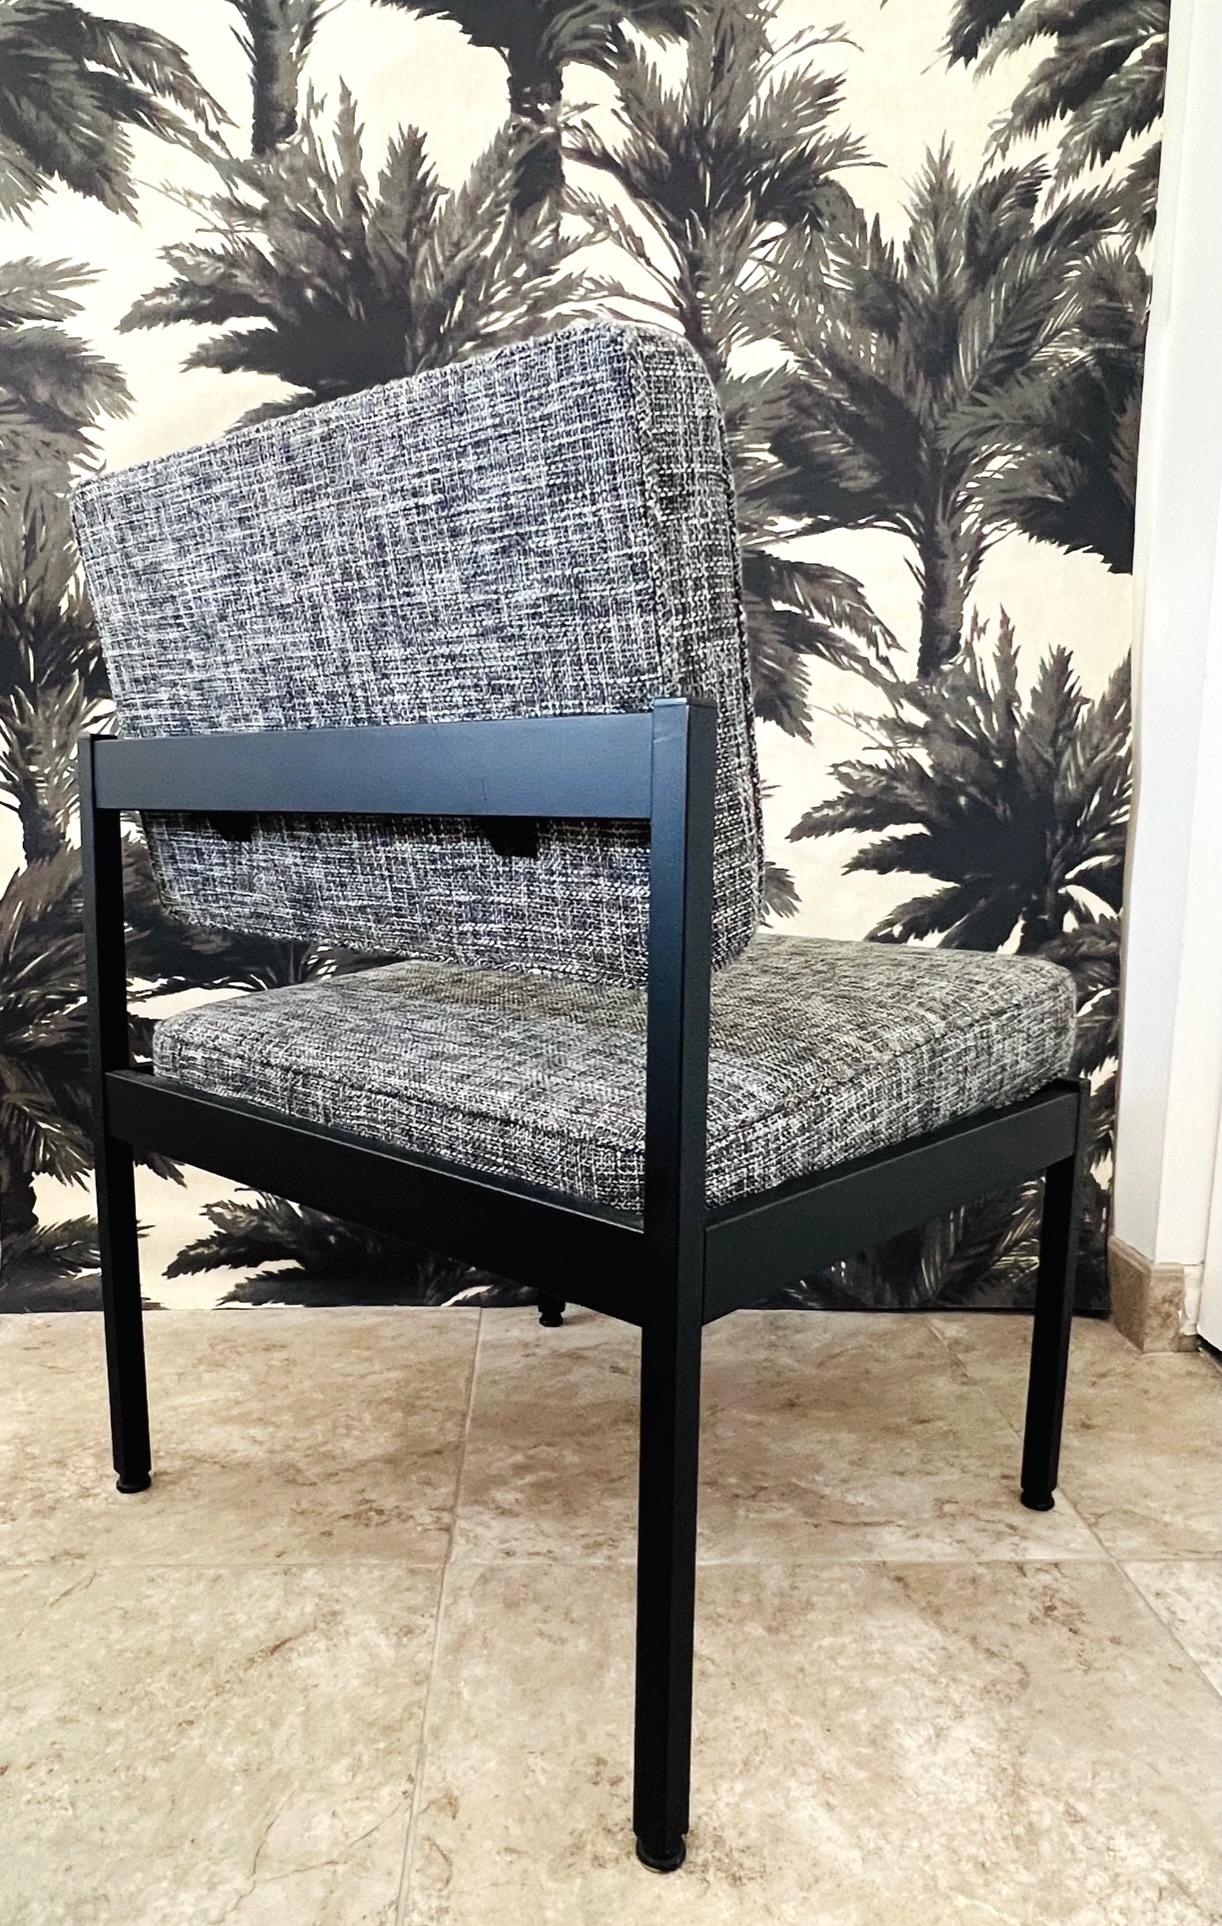 Enameled Vintage Knoll Style Chair in Black and Ivory Tweed Upholstery, c. 1970's For Sale